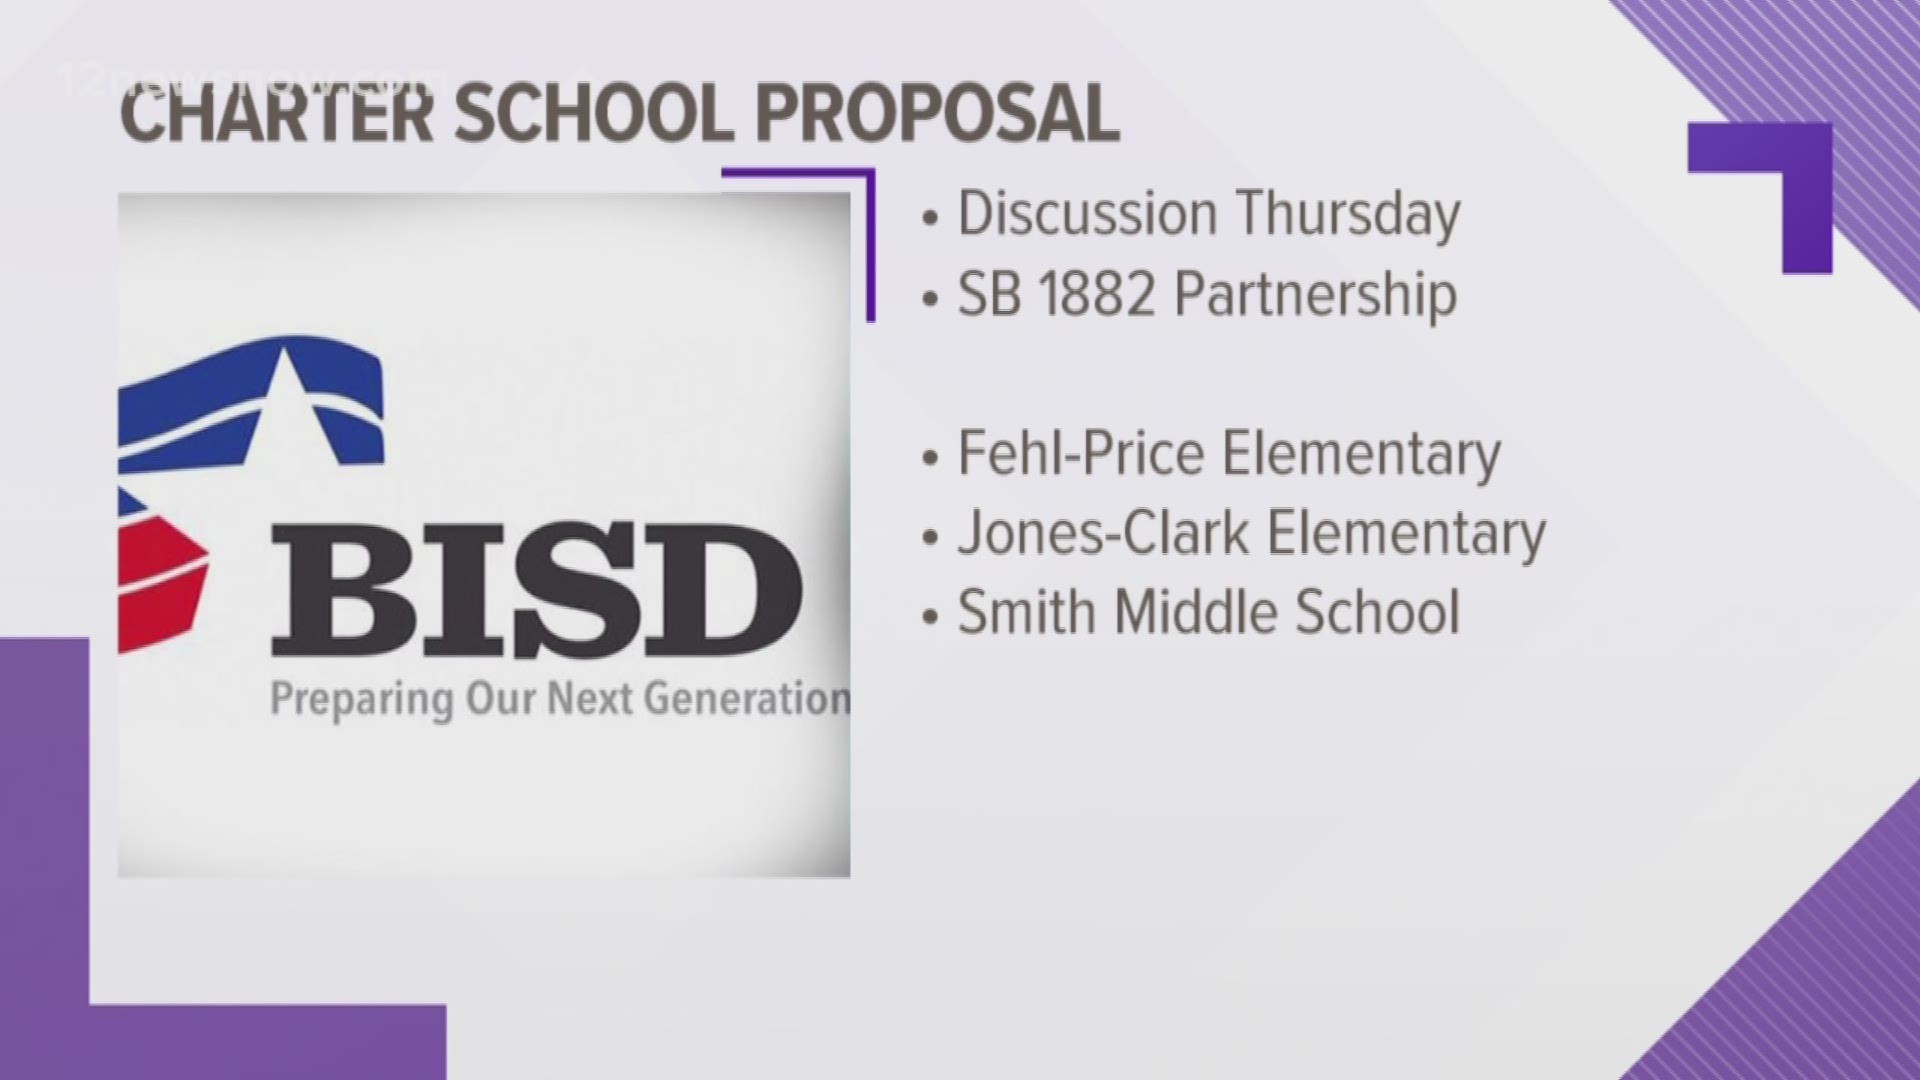 Discussion will be held Thursday concerning the possibility of Fehl-Price Elementary, Jones-Clark Elementary and Smith Middle School being run by charter schools.